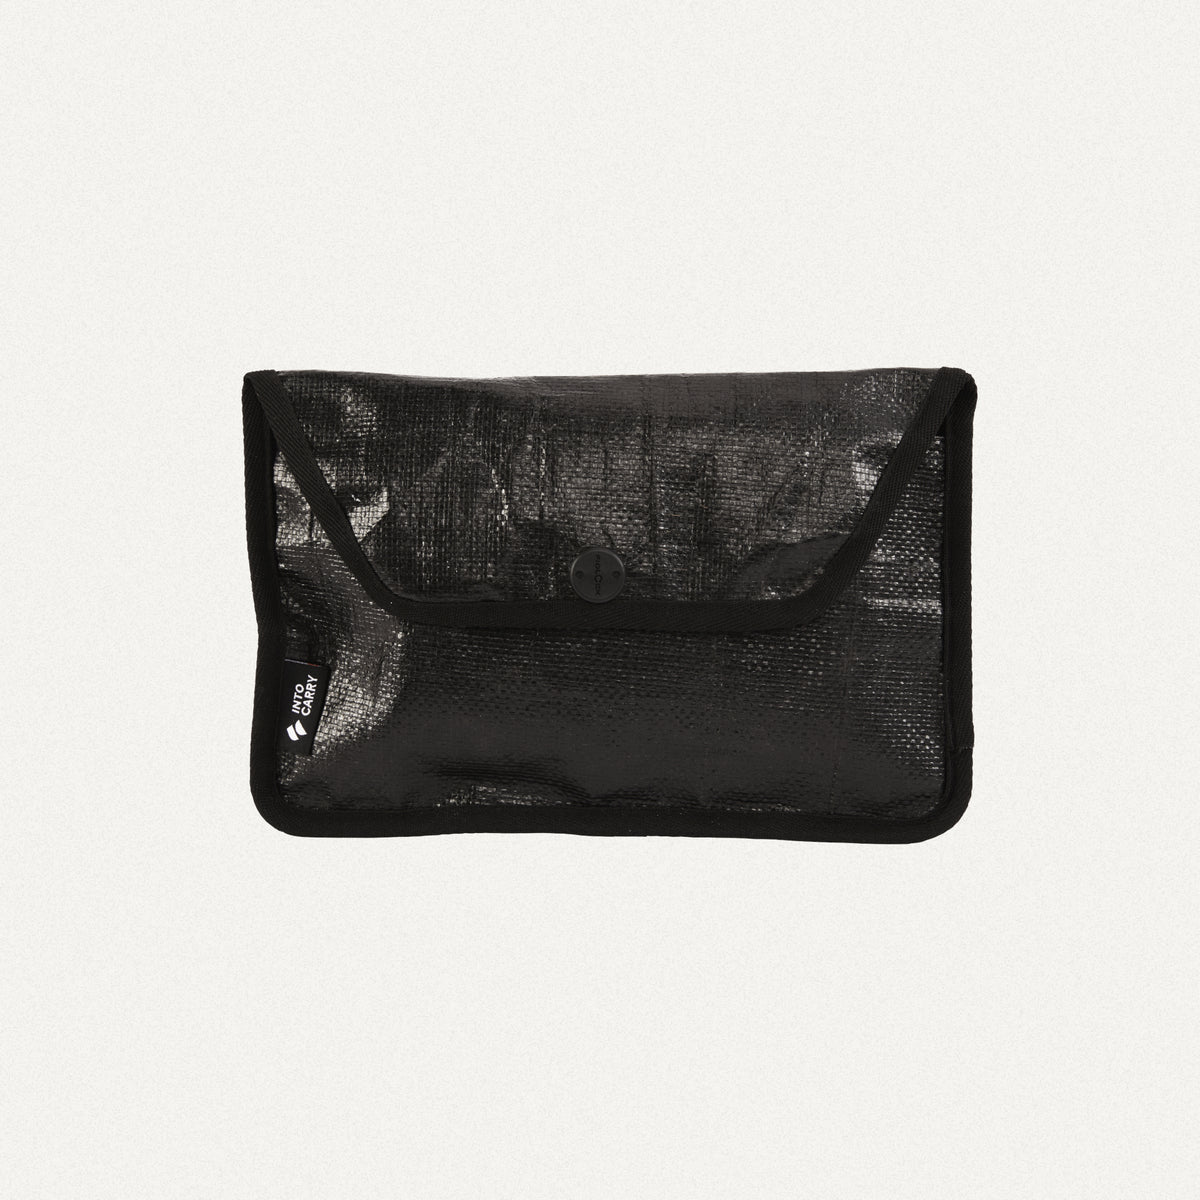 Pouch // INDUSTRIAL